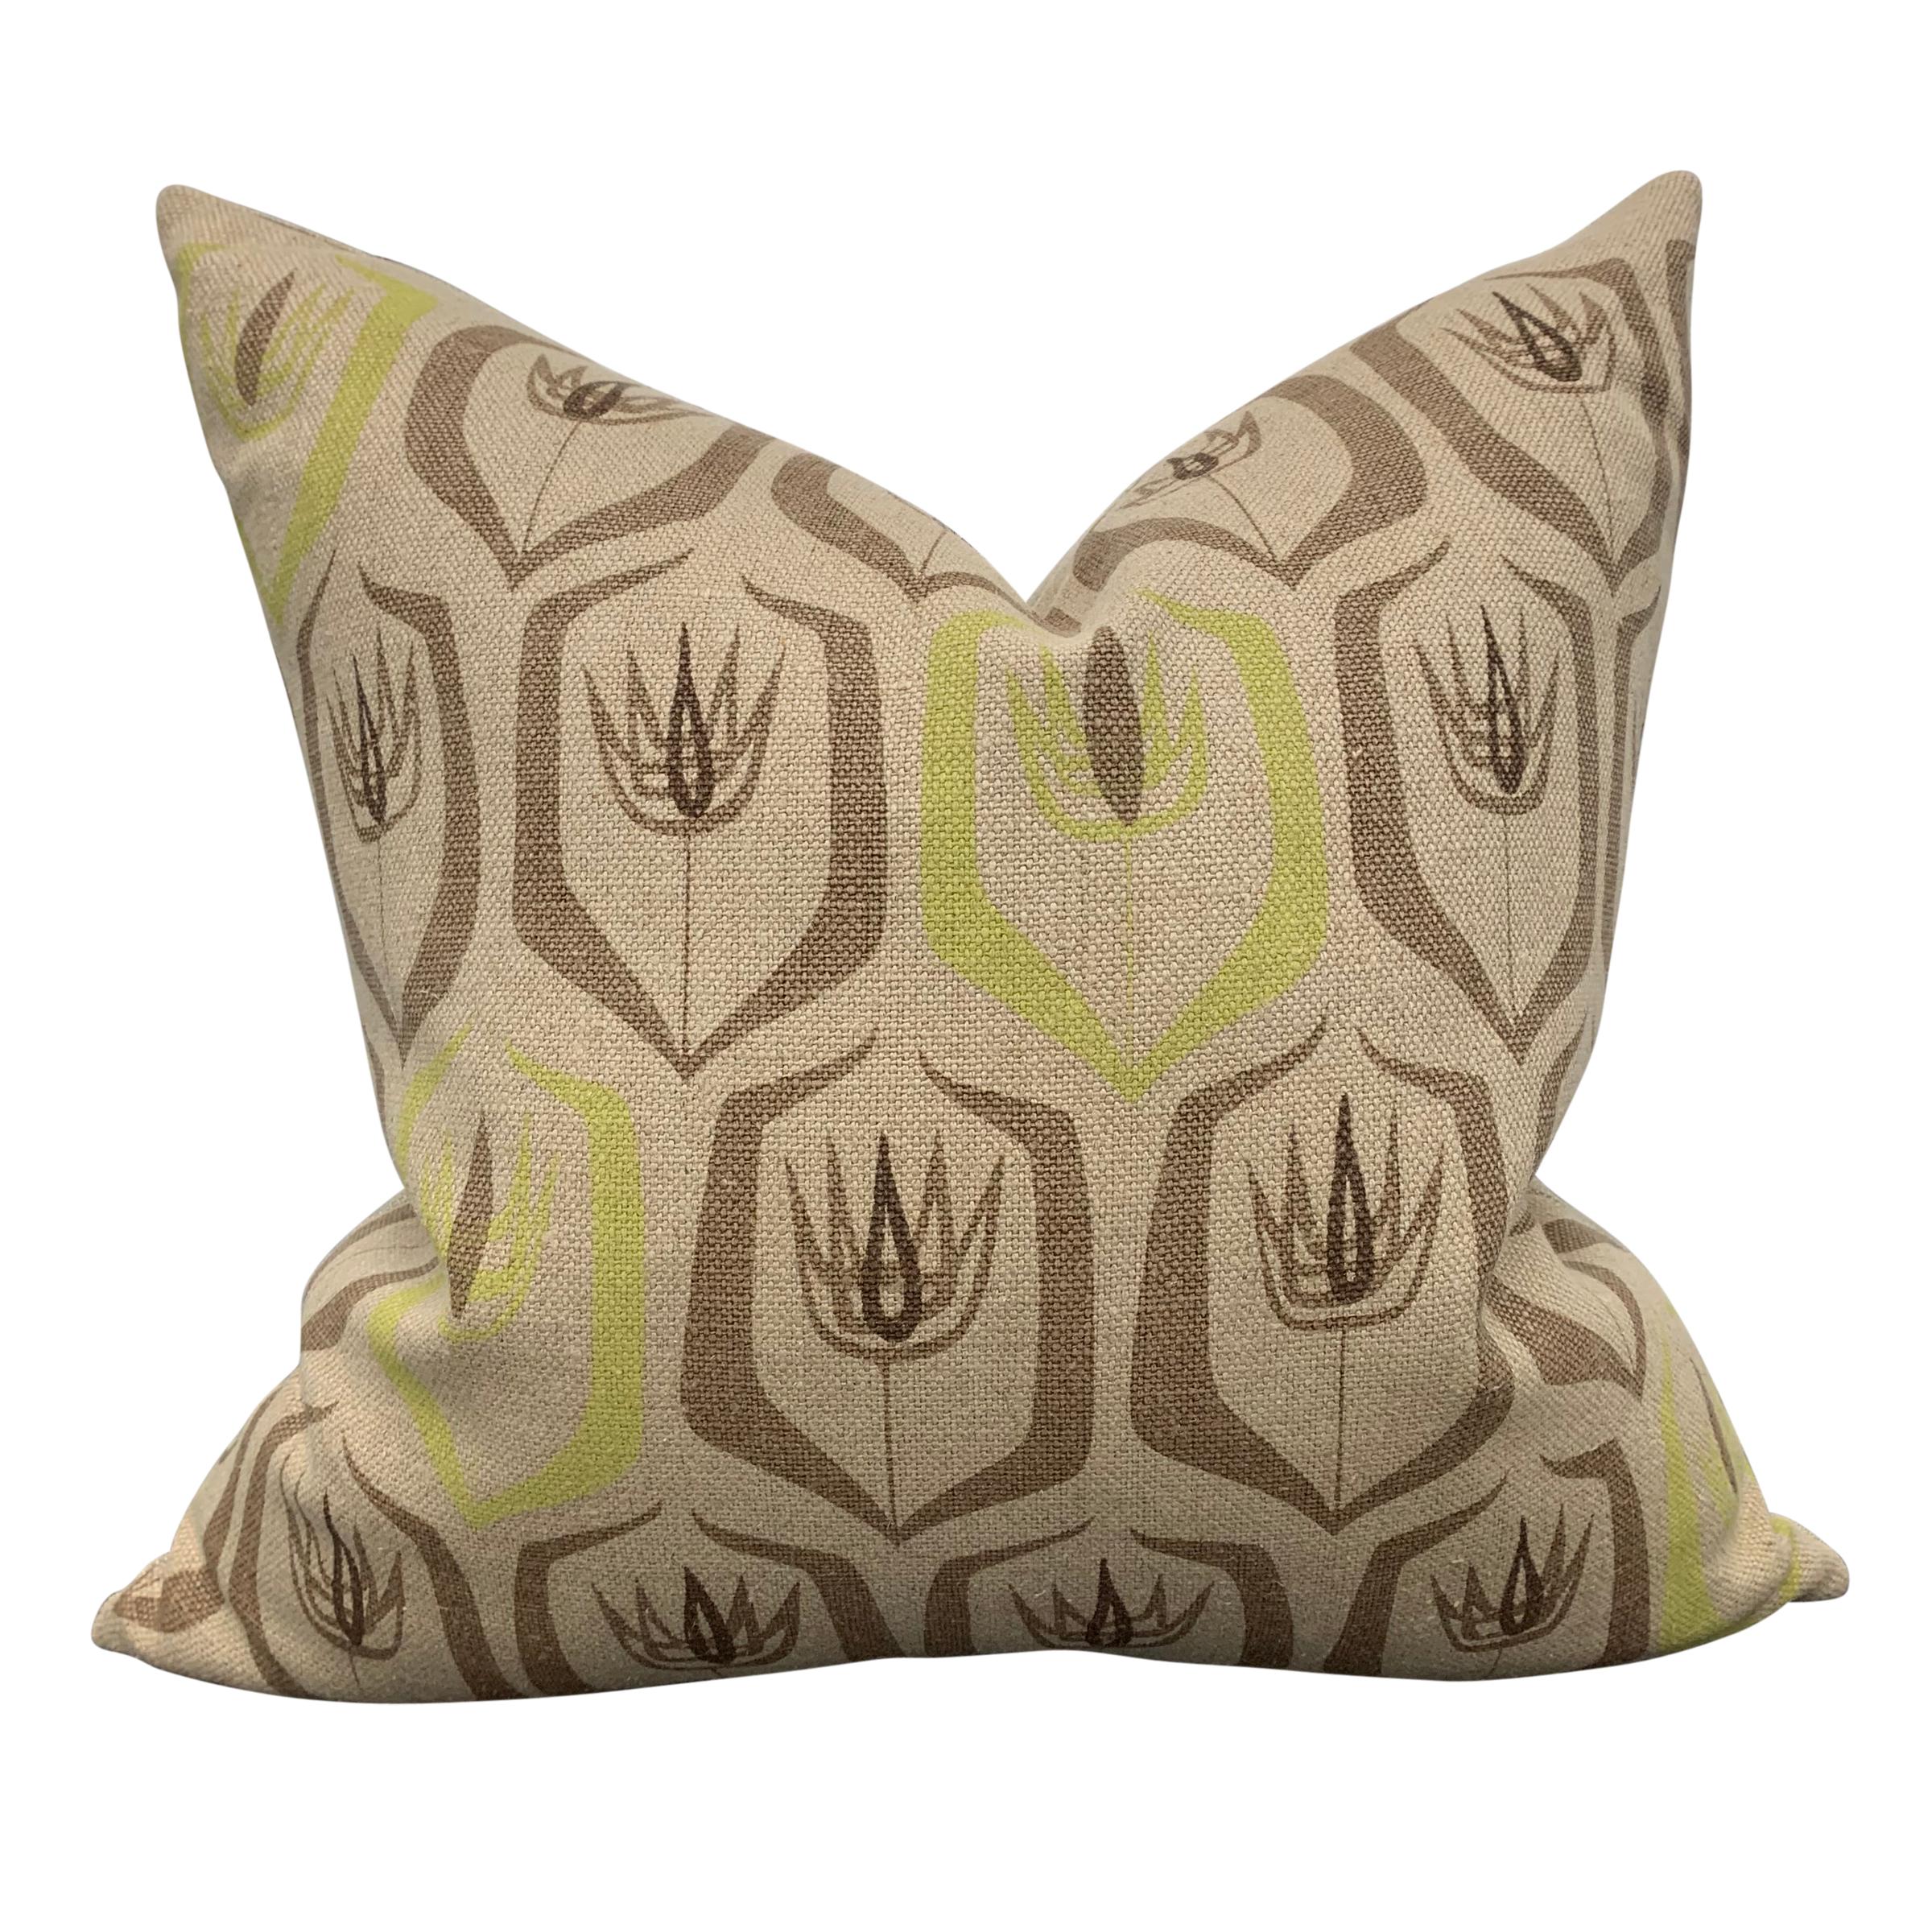 A pair of custom pillows made from a mid-20th century Swedish screen printed linen with a floral pattern in brown and chartreuse green. Backed in linen, and filled with down.